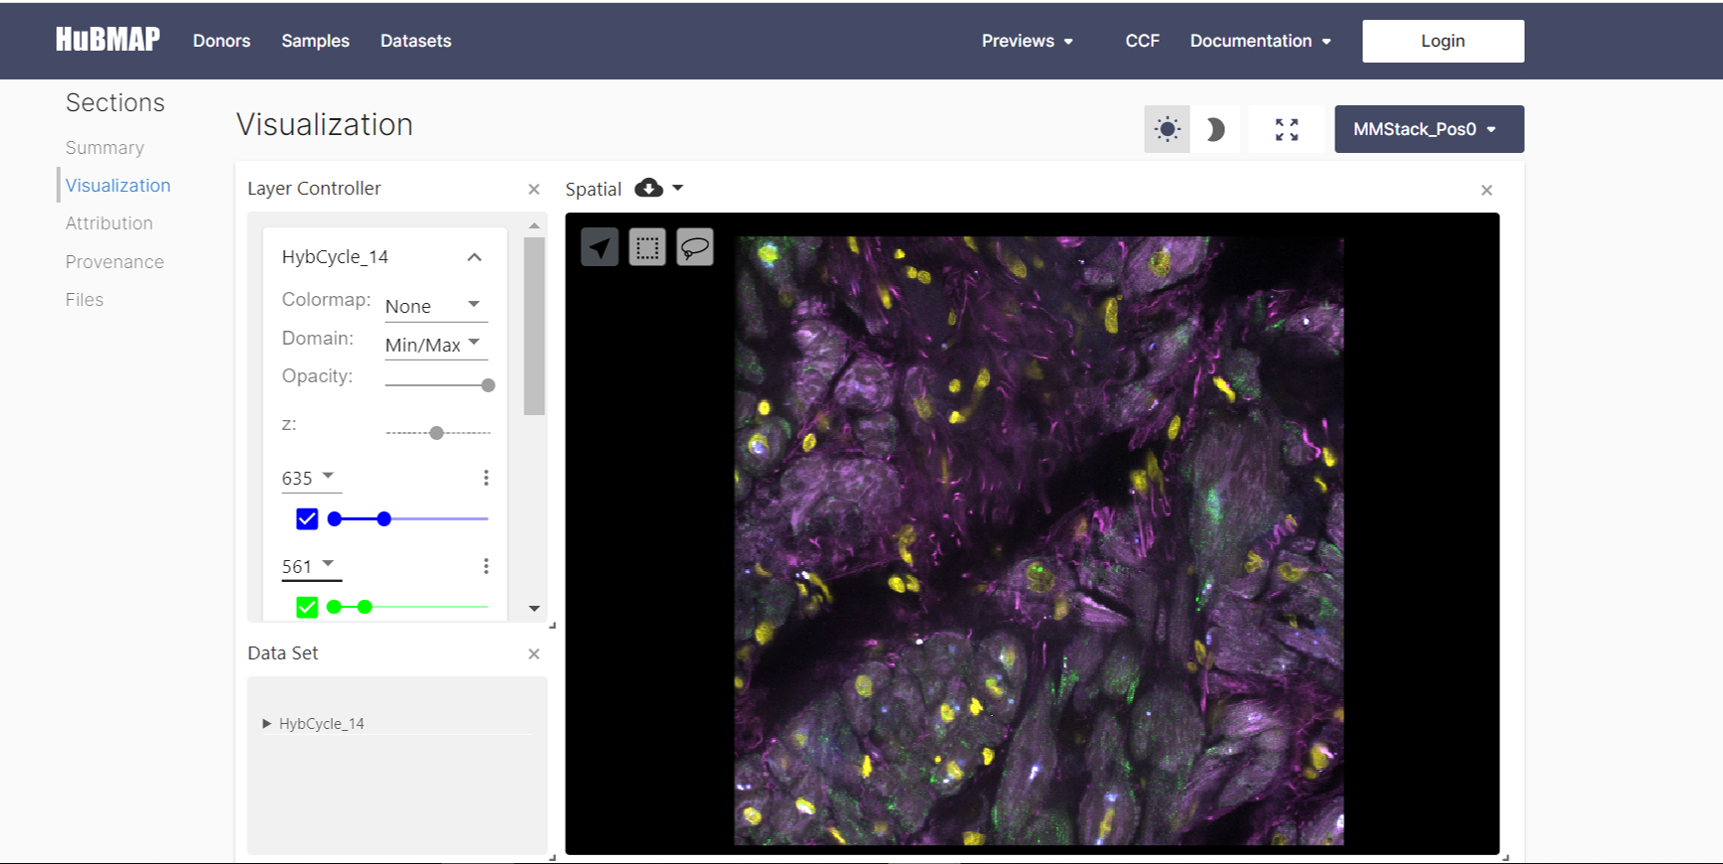 SeqFISH image of a piece of a heart tissue from CalTech Tissue Mapping Center using Vitessce visualization software.